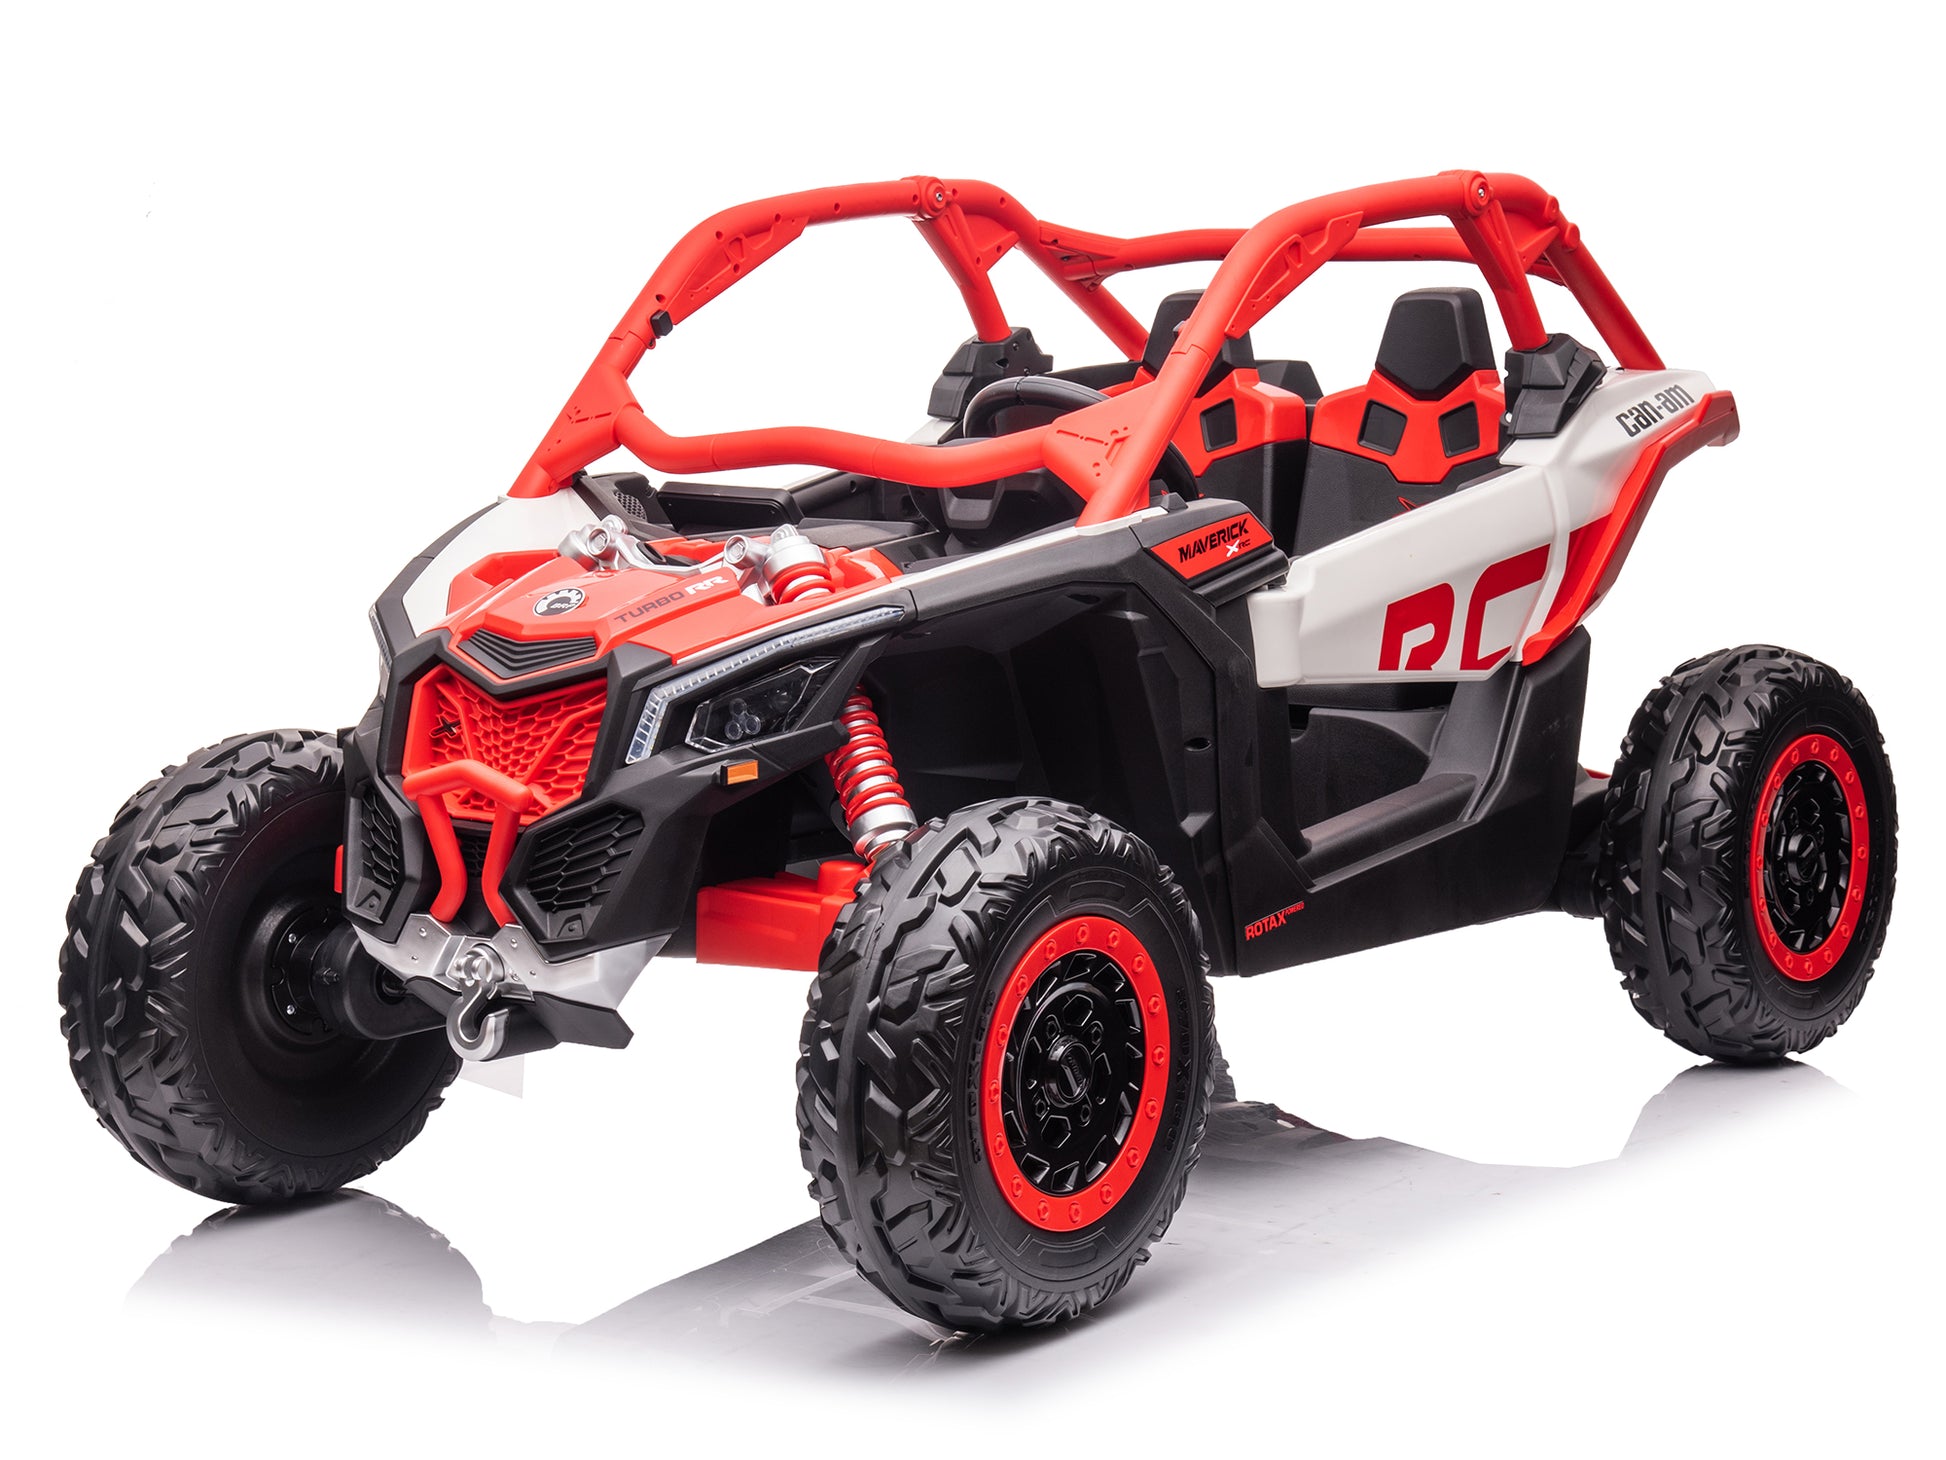 24V Can-Am Maverick X3 Kids Ride-On Buggy - Red – Big Toys Direct